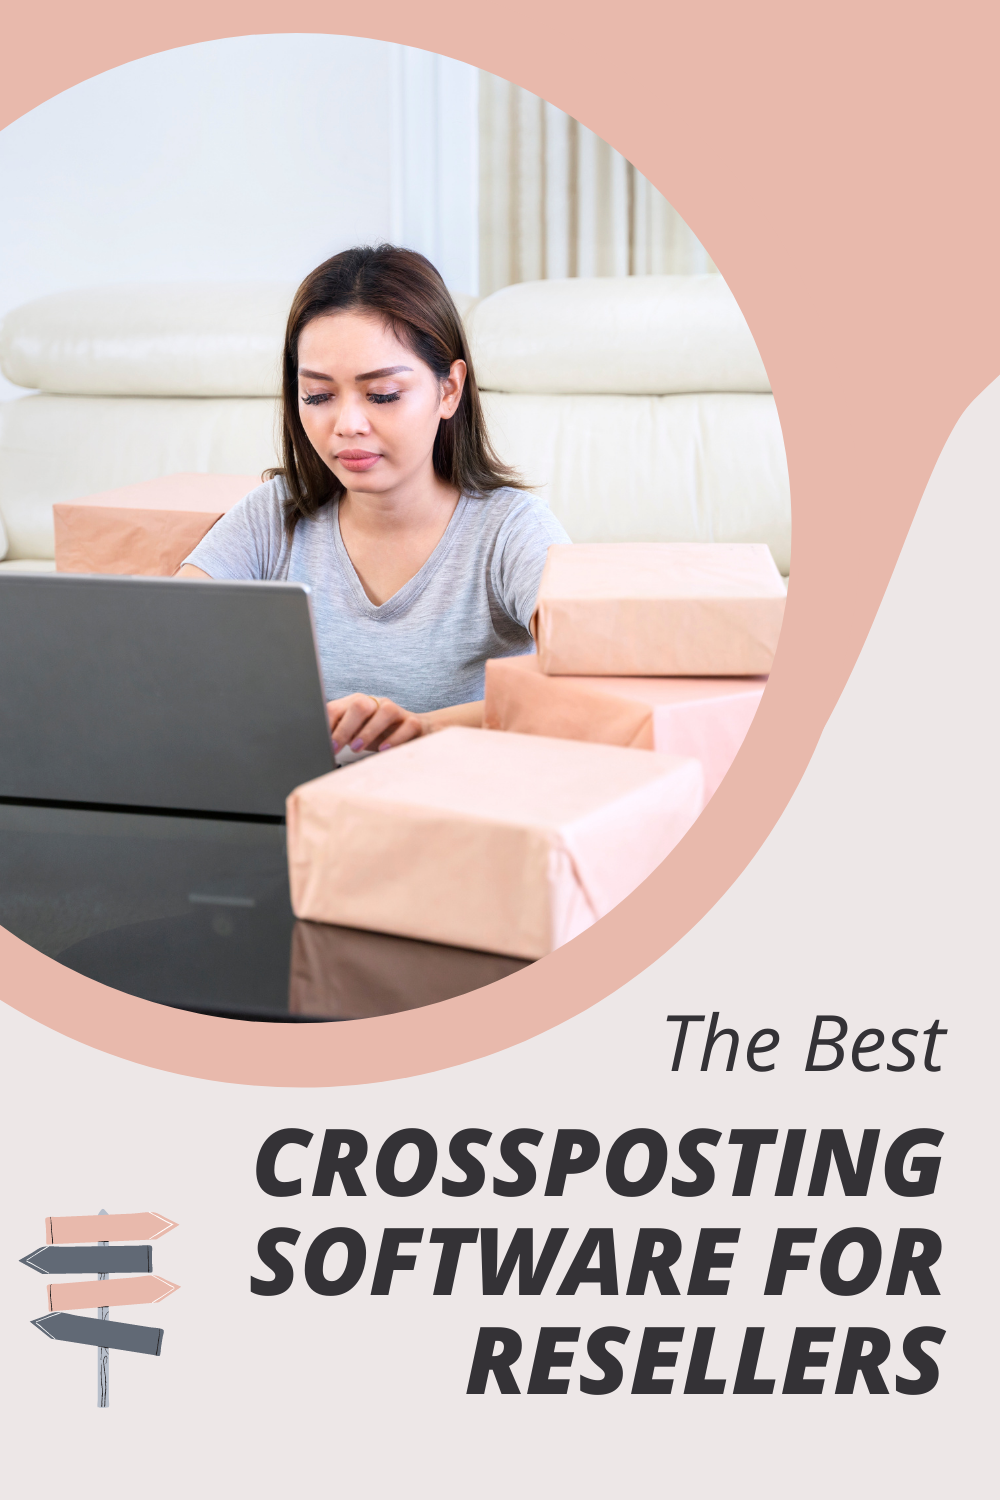 The Best Crossposting Software for Resellers